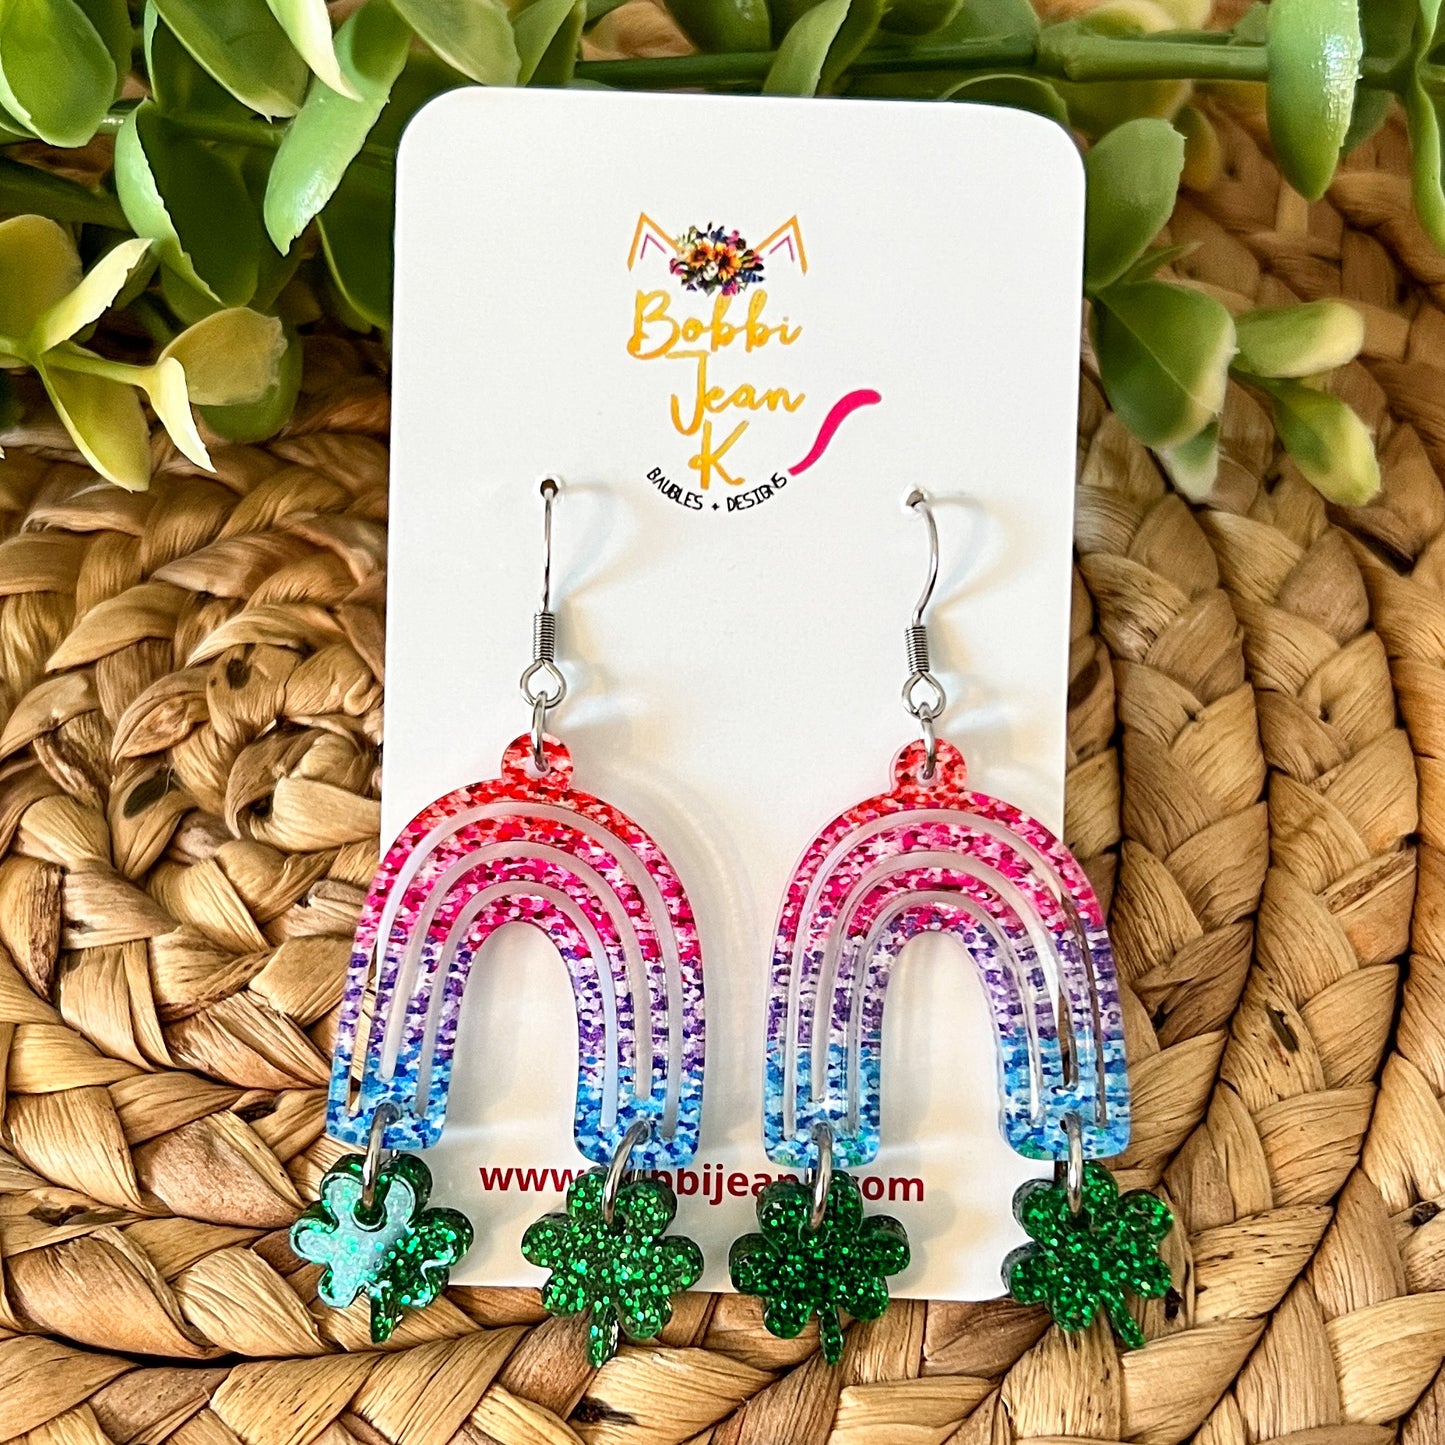 Colorful Rainbow with Glittered Clovers Acrylic Earrings: Choose From 2 Color Ways